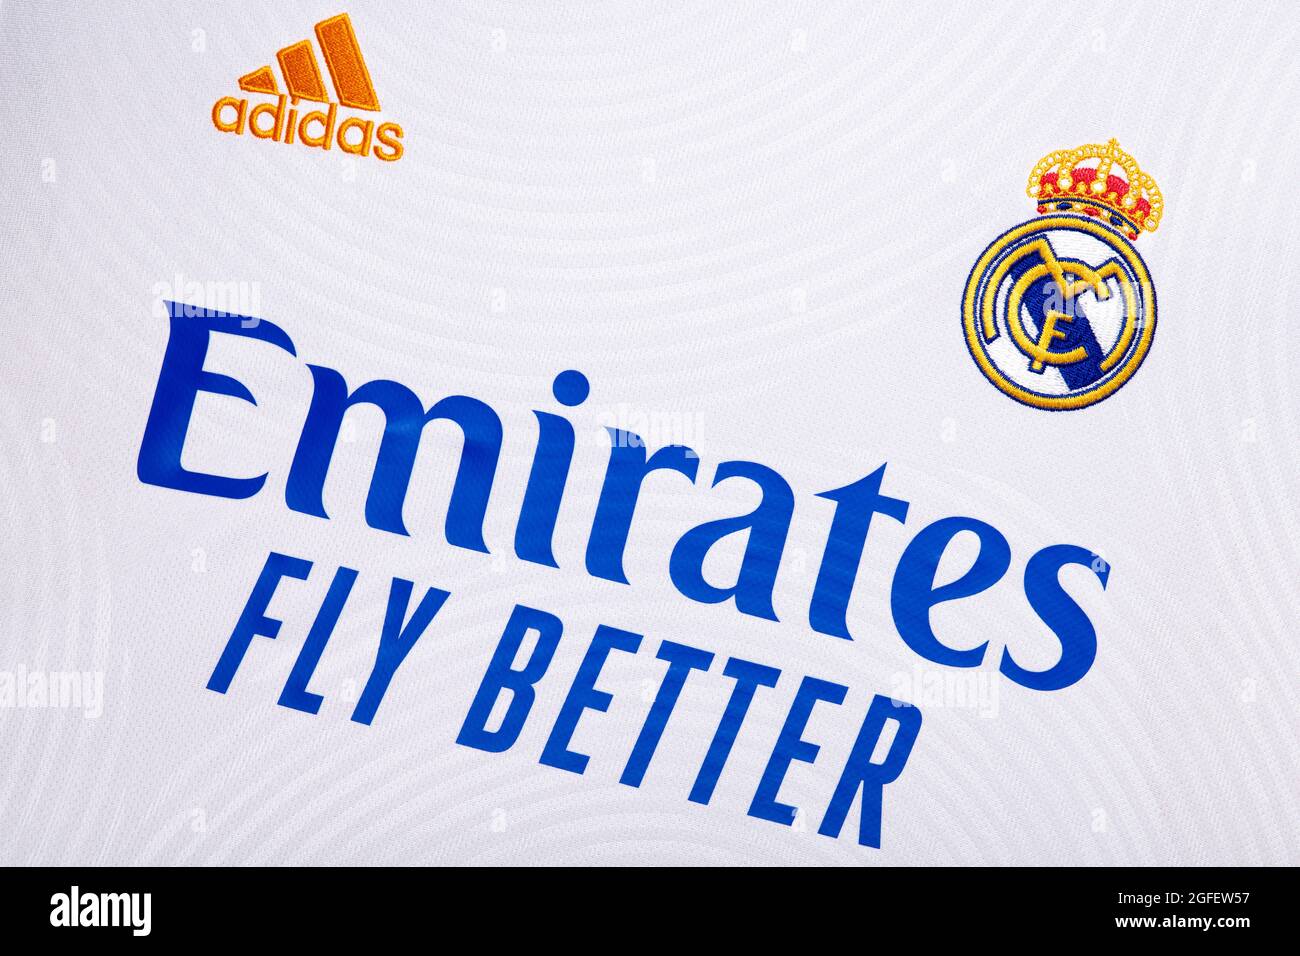 Real Madrid Cf High Resolution Stock Photography and Images - Alamy